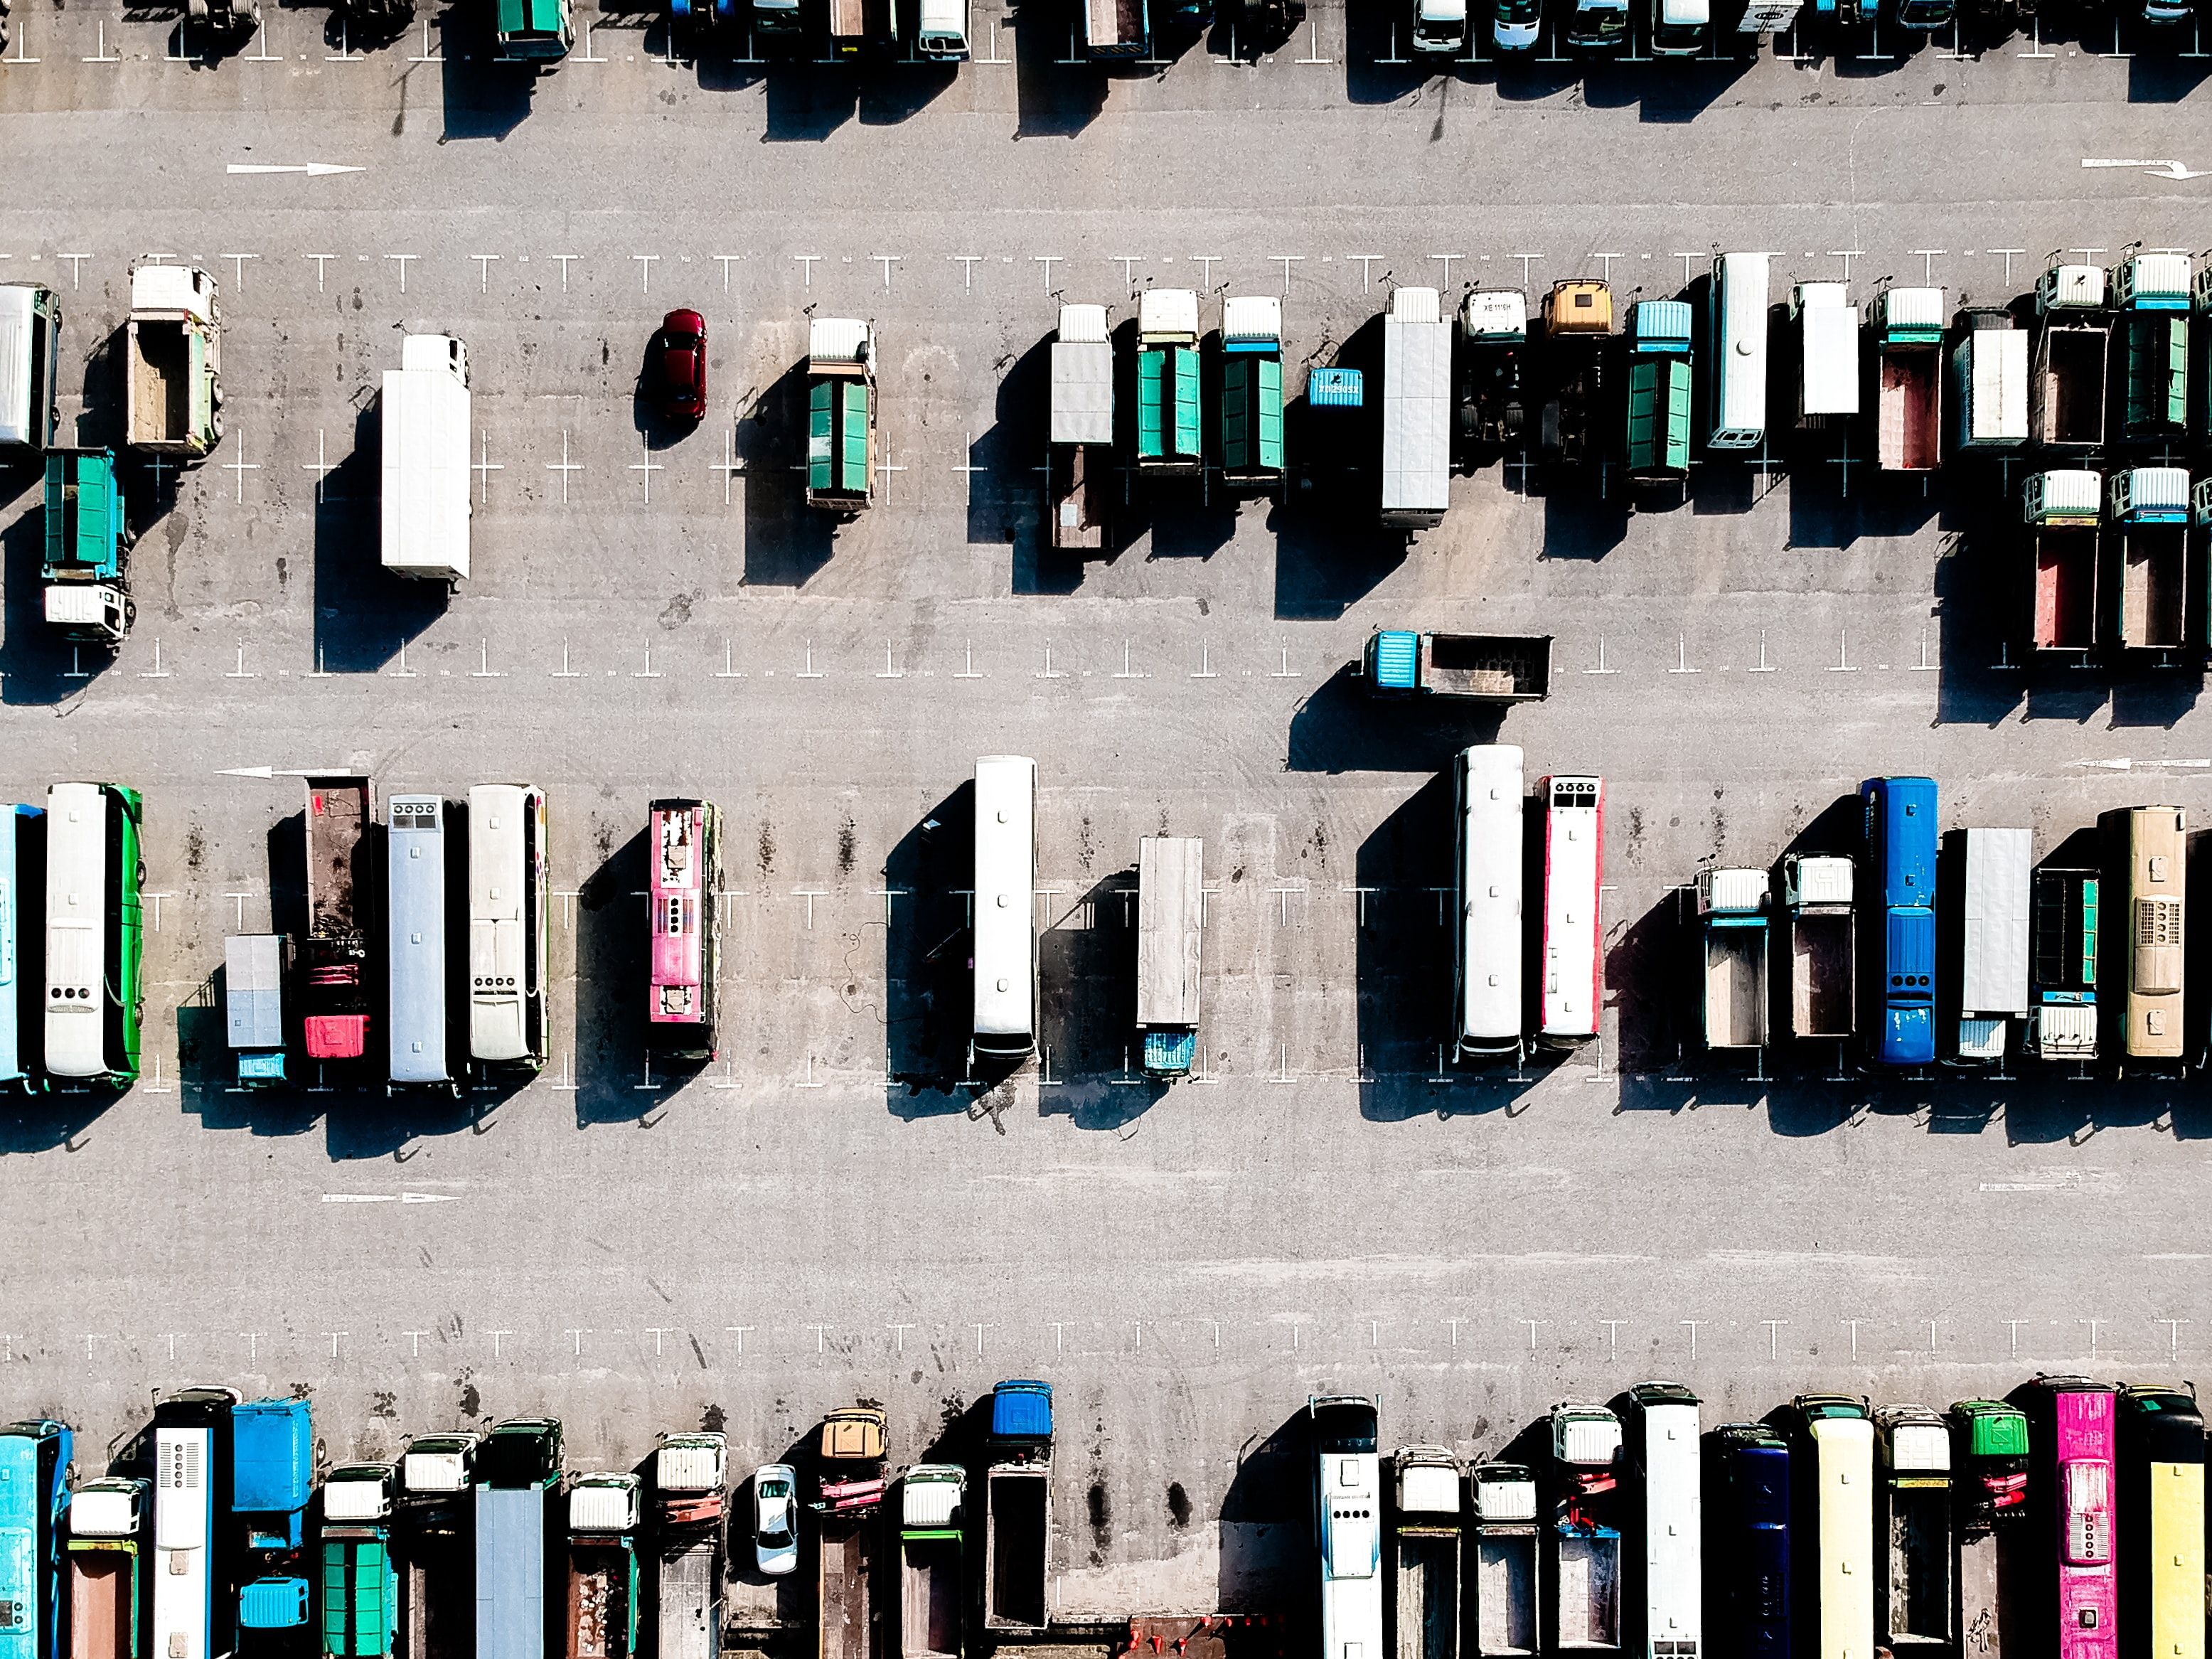 Trucks in a parking space